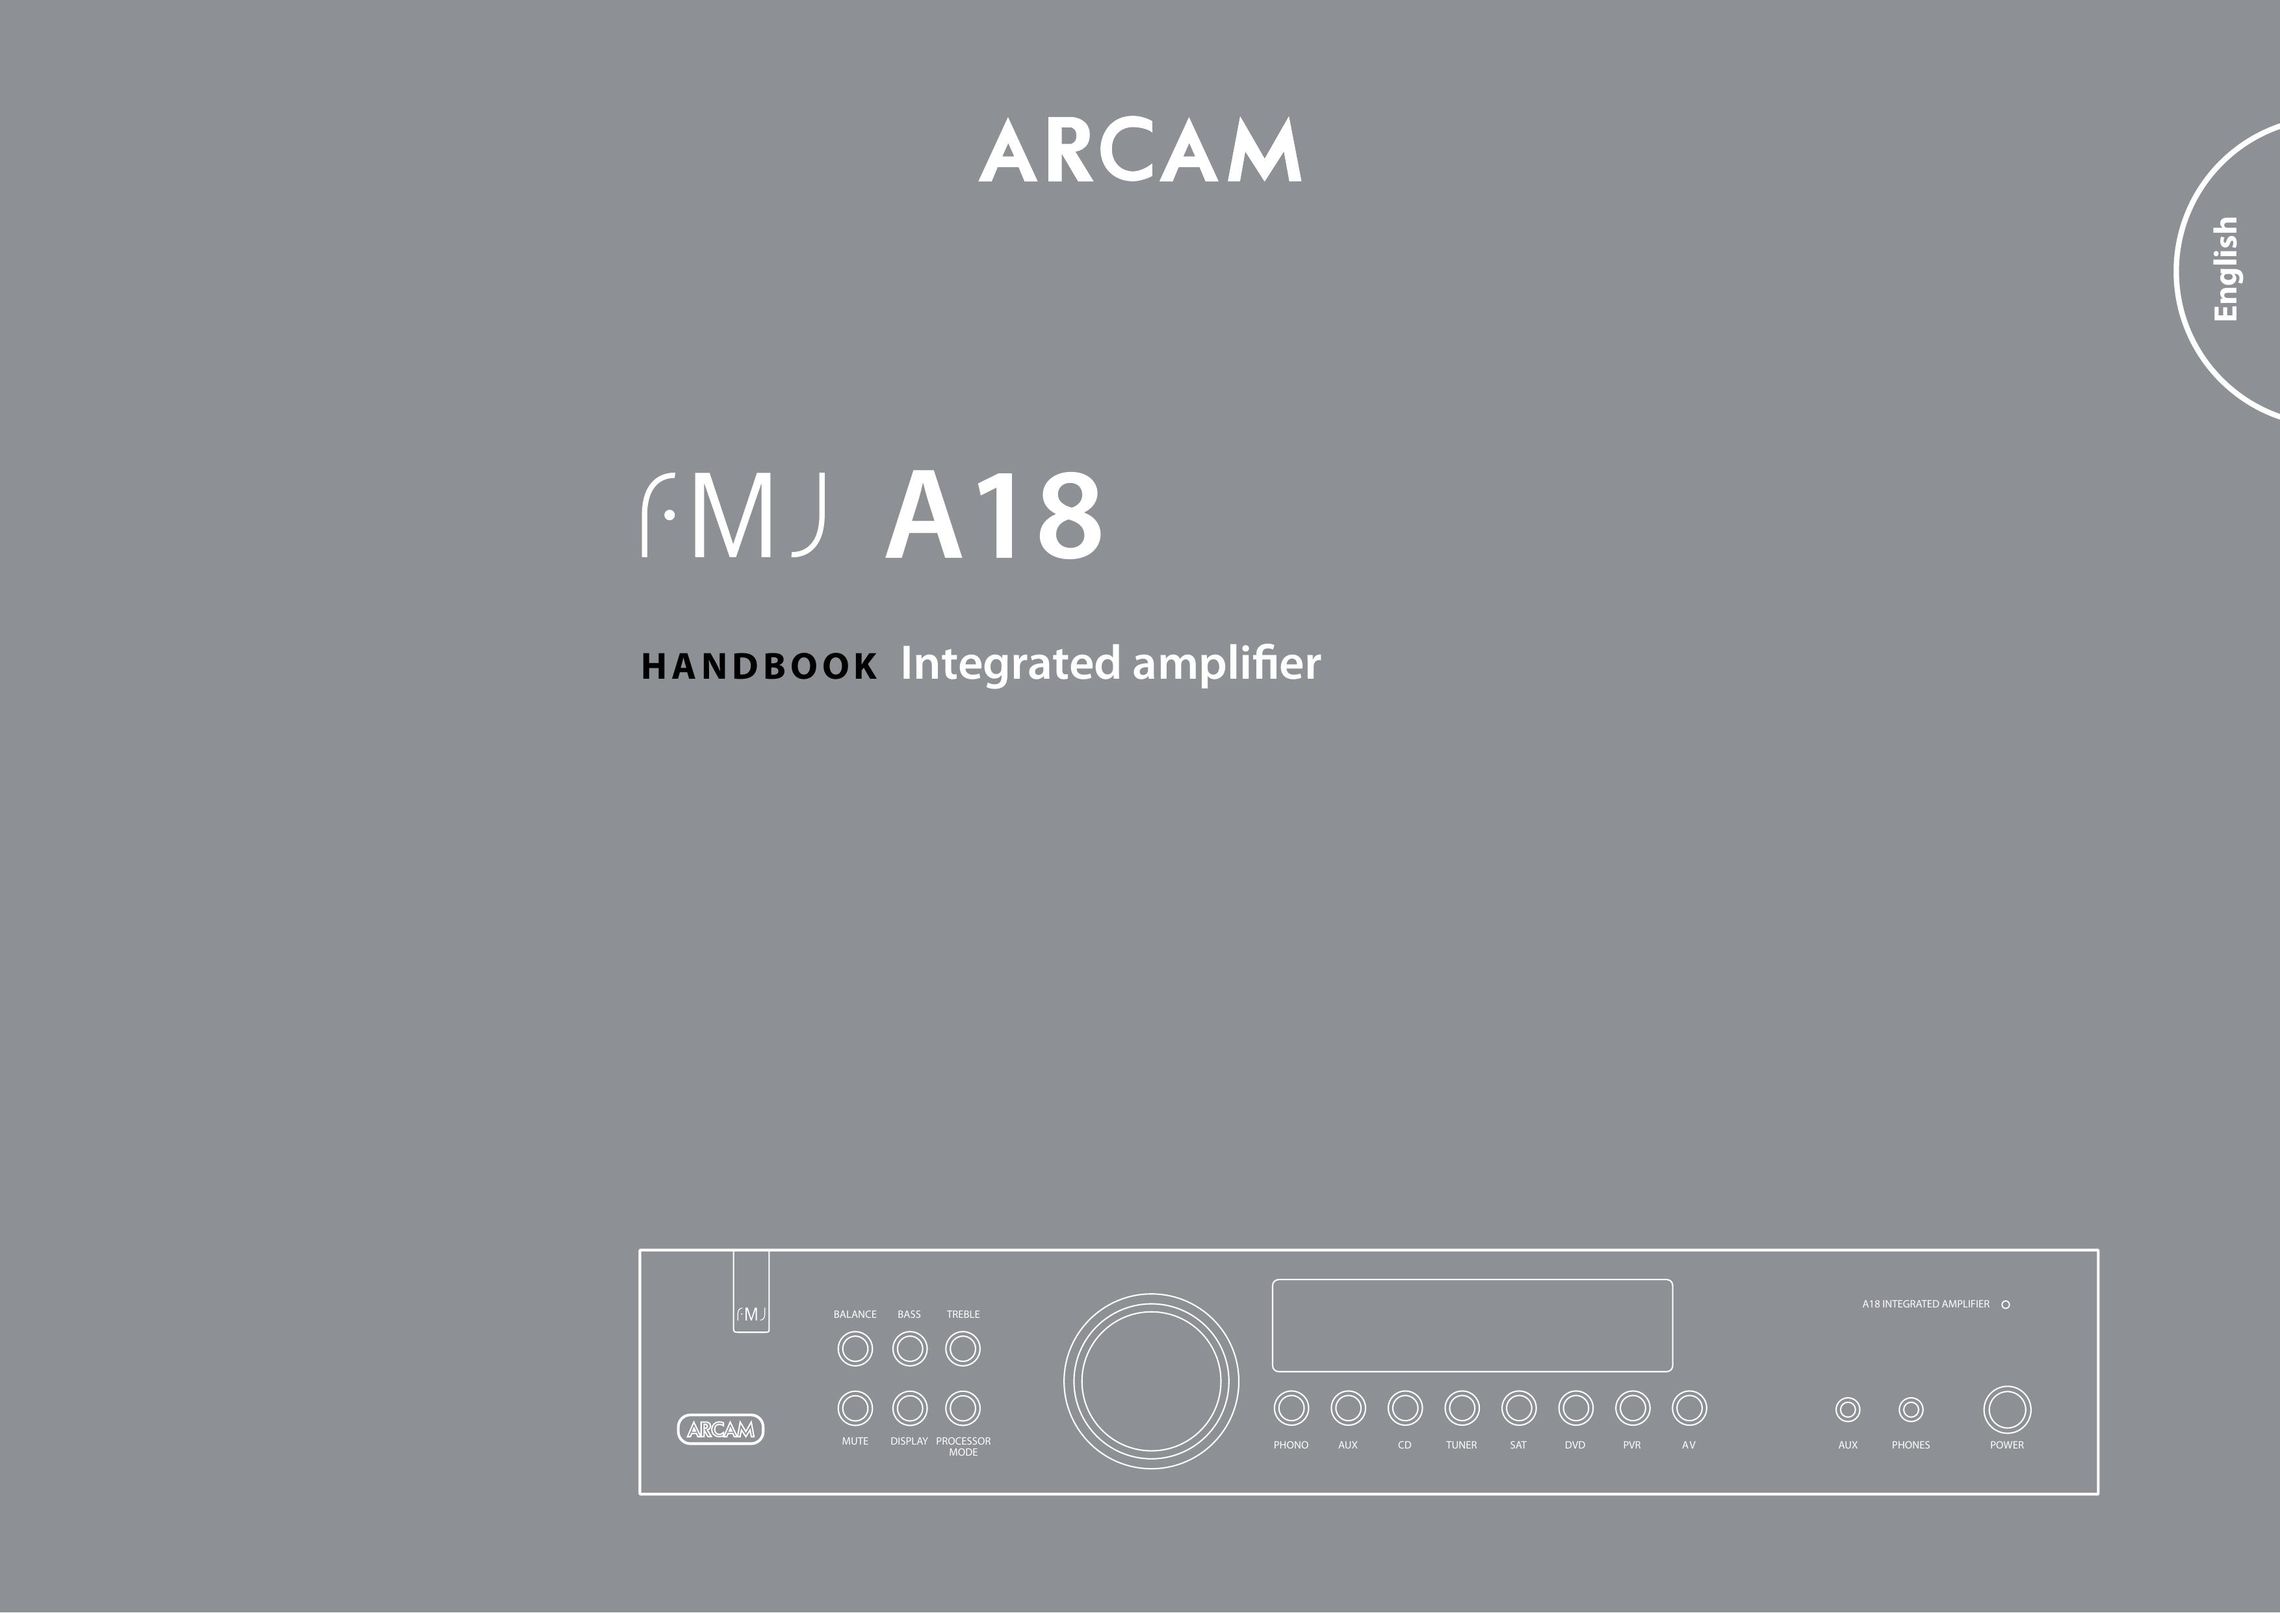 Arcam FMJ A18 Stereo Amplifier User Manual